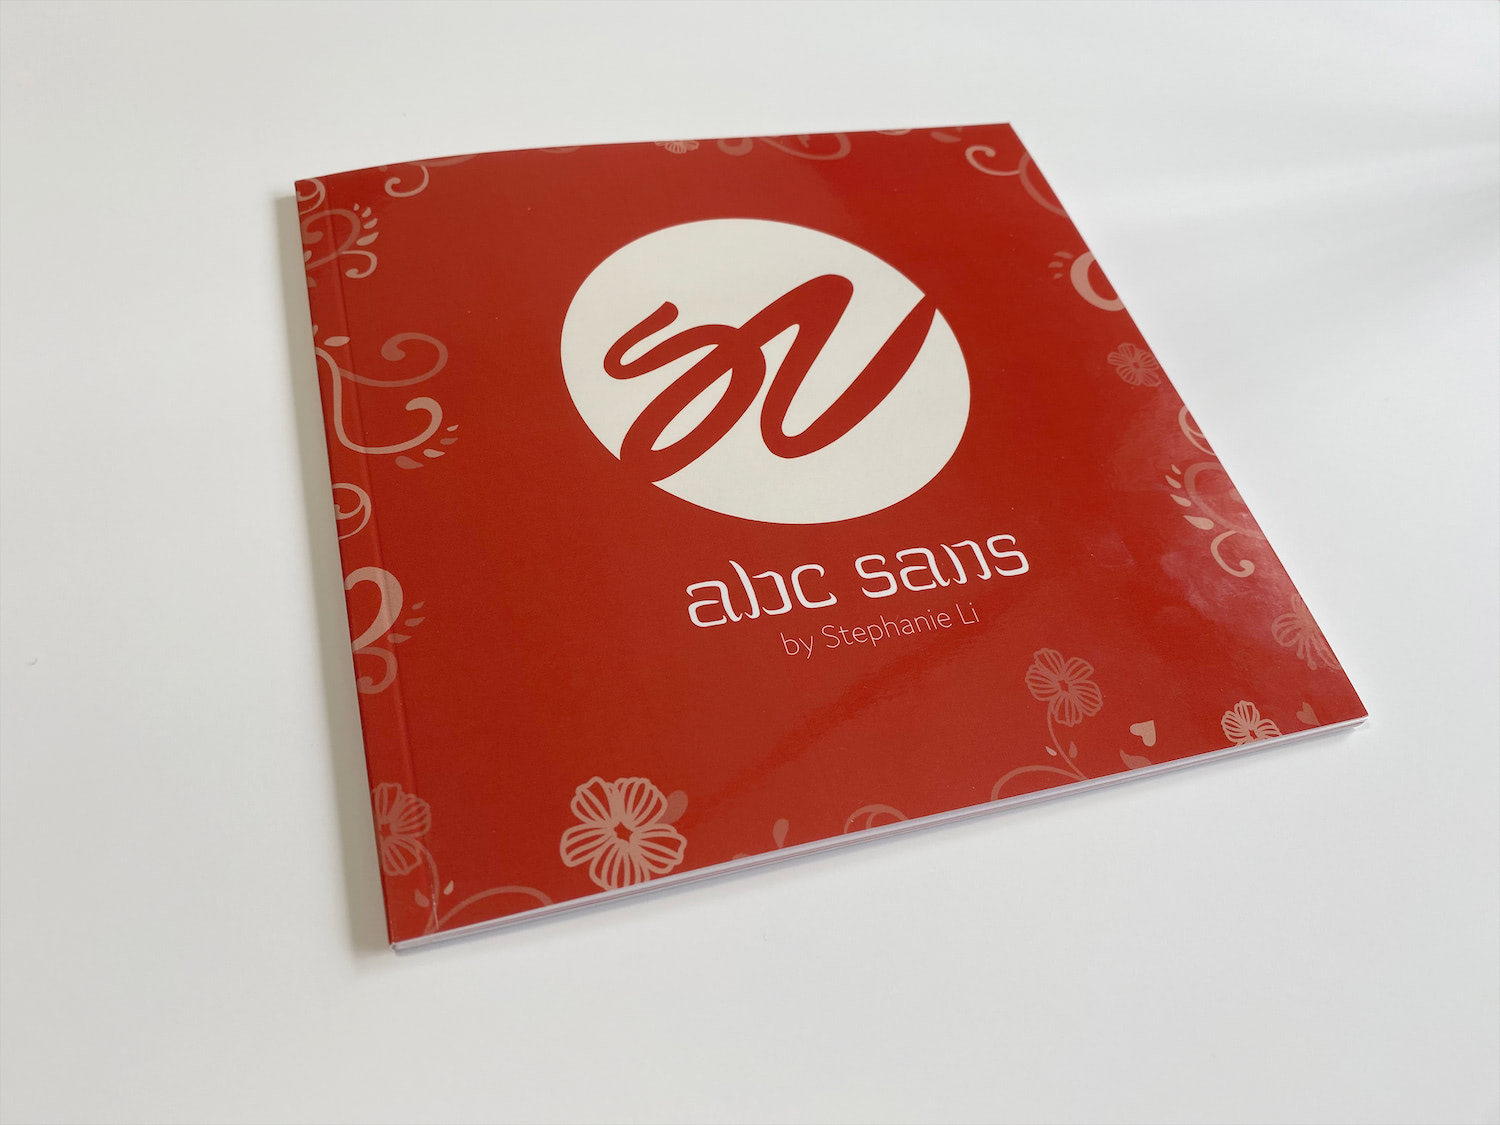 A photo of the cover of the ABC Sans style guide booklet, is photographed at an angle. It has a glossy, red cover, with some muted pink floral designs on its edges.